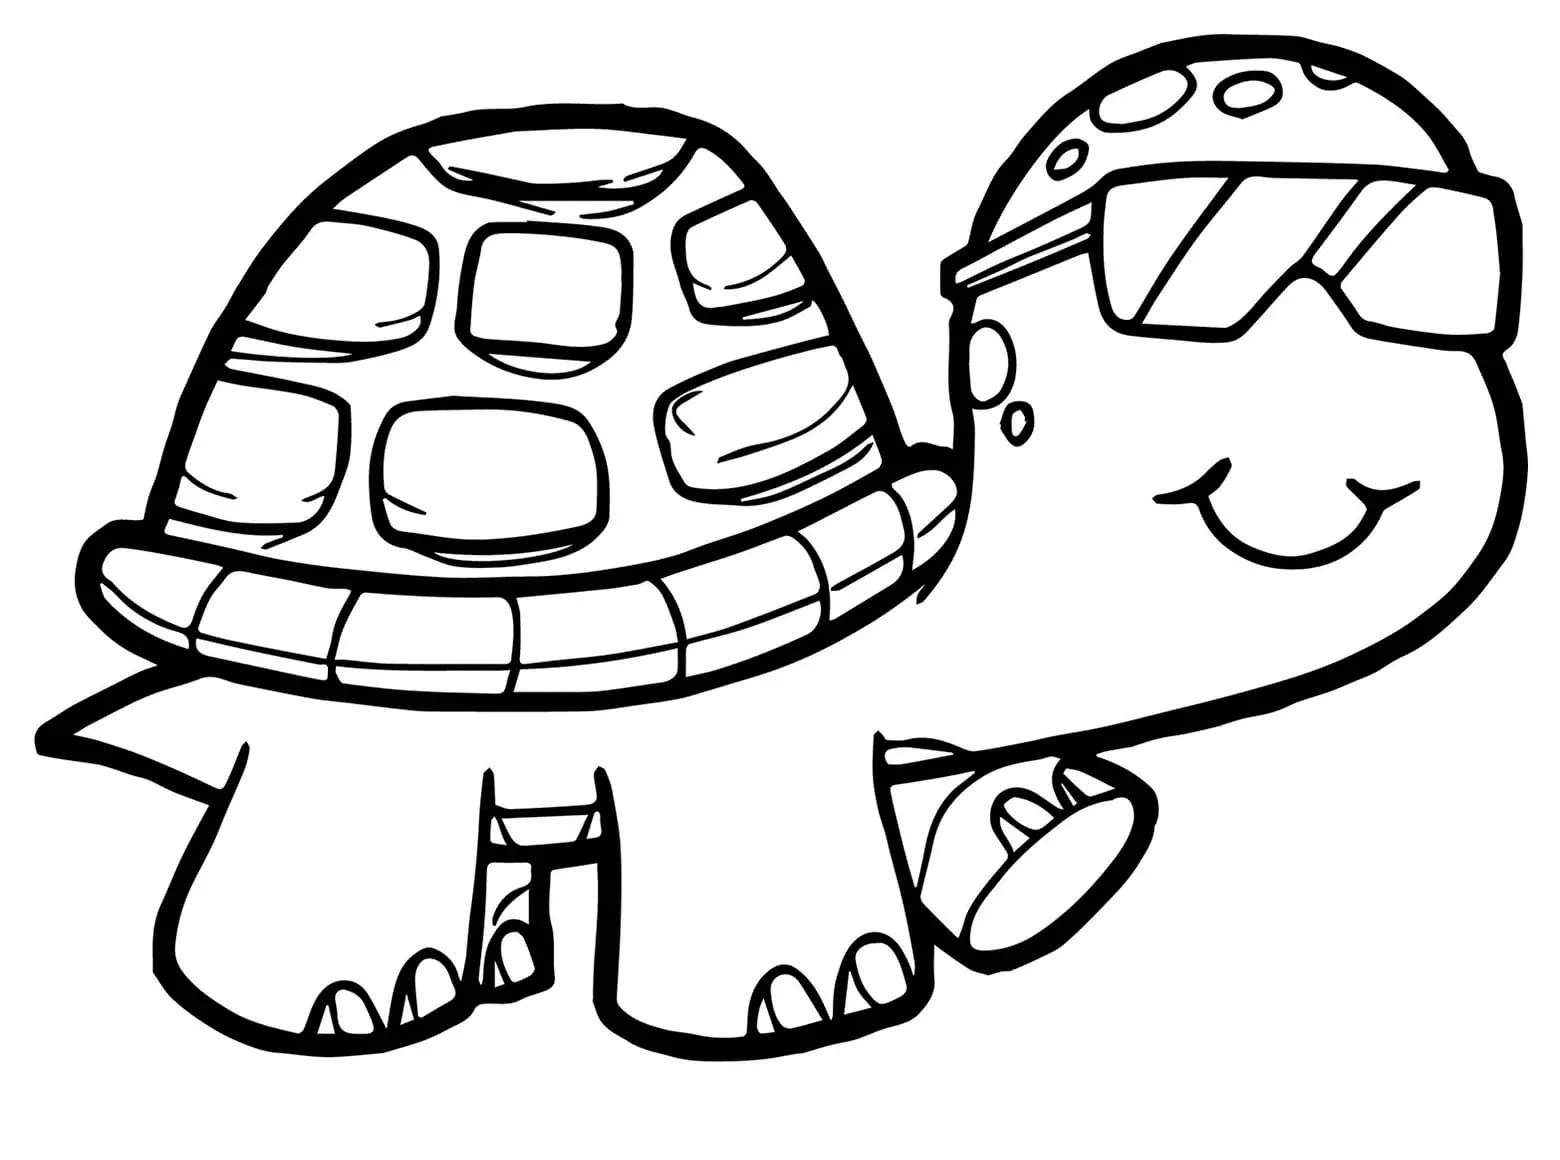 Petite Tortue coloring page